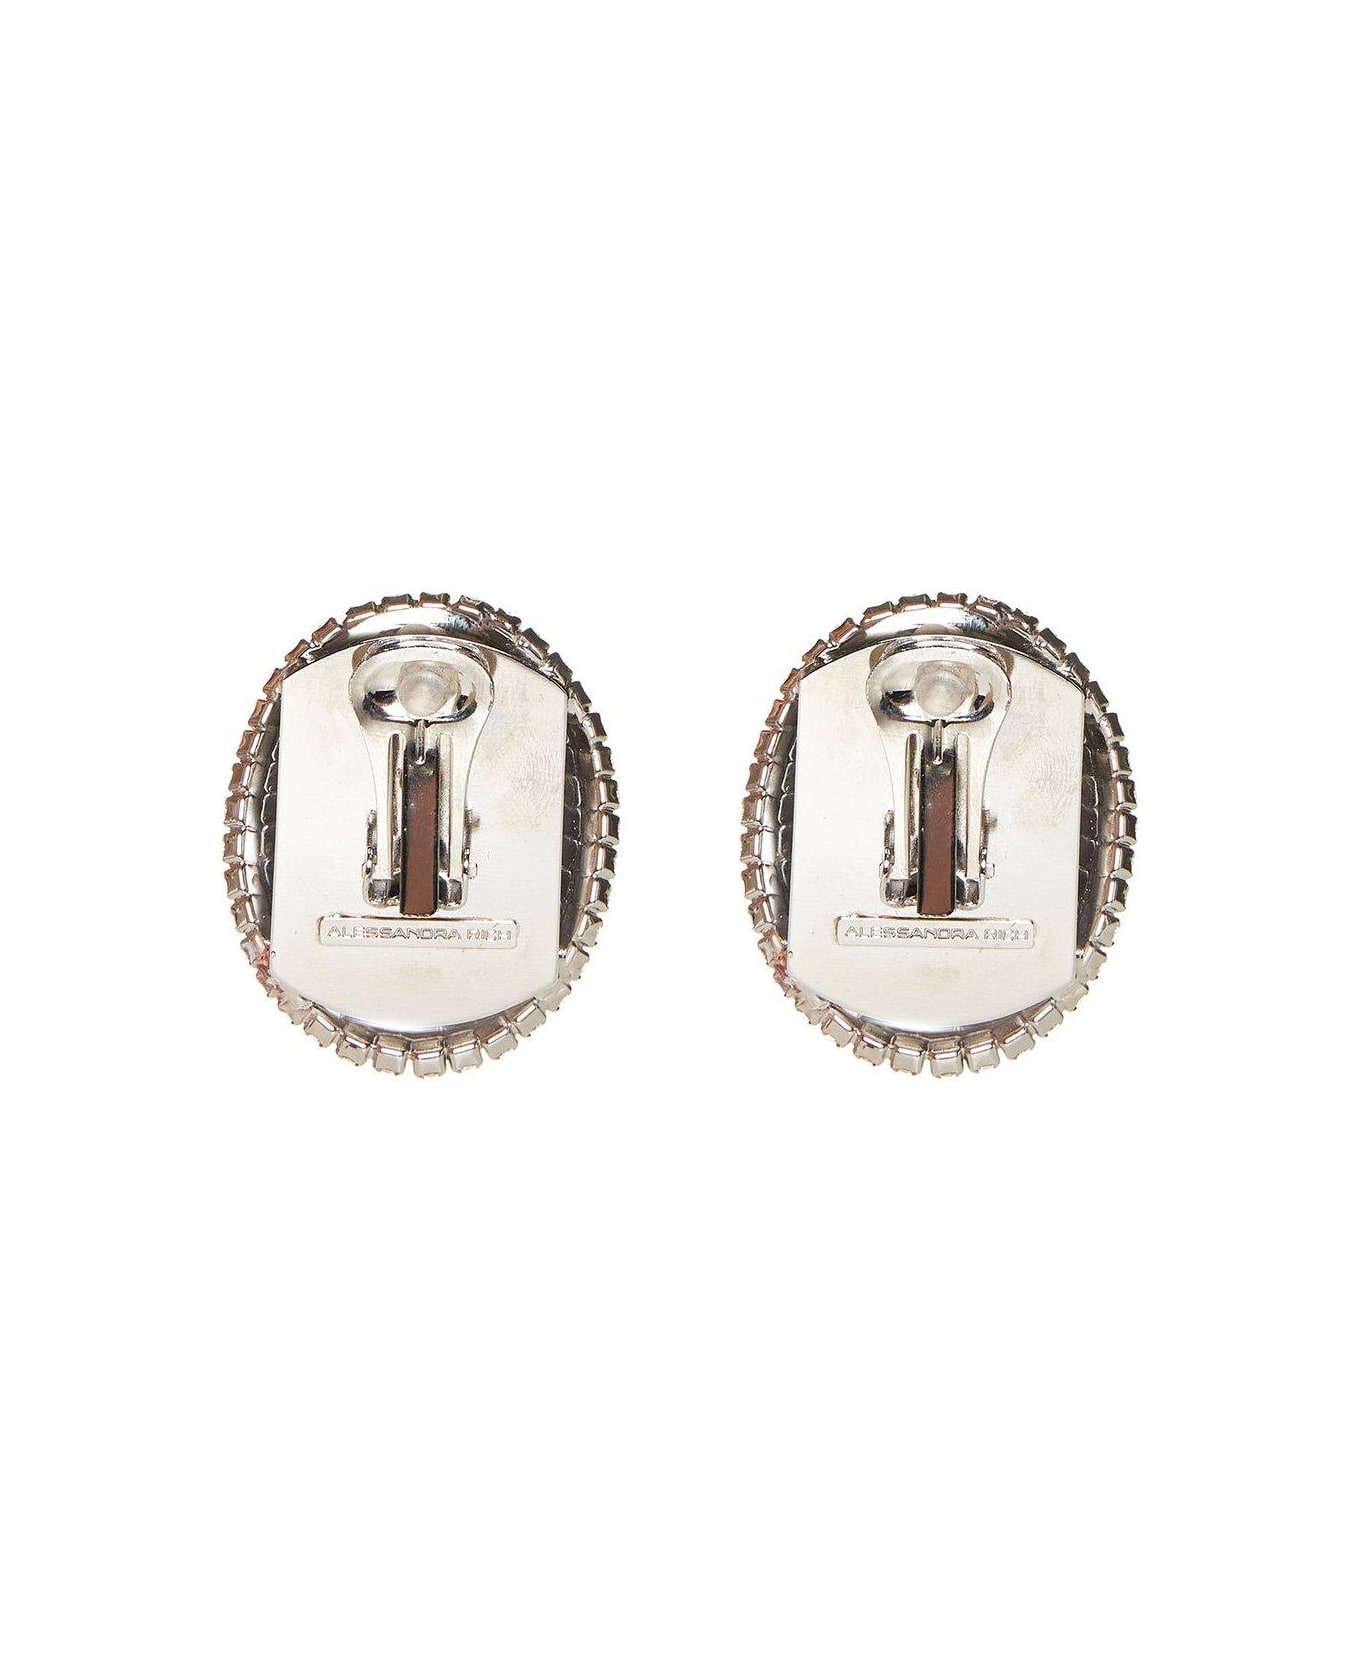 Alessandra Rich Embellished Clip-on Earrings - Silver イヤリング